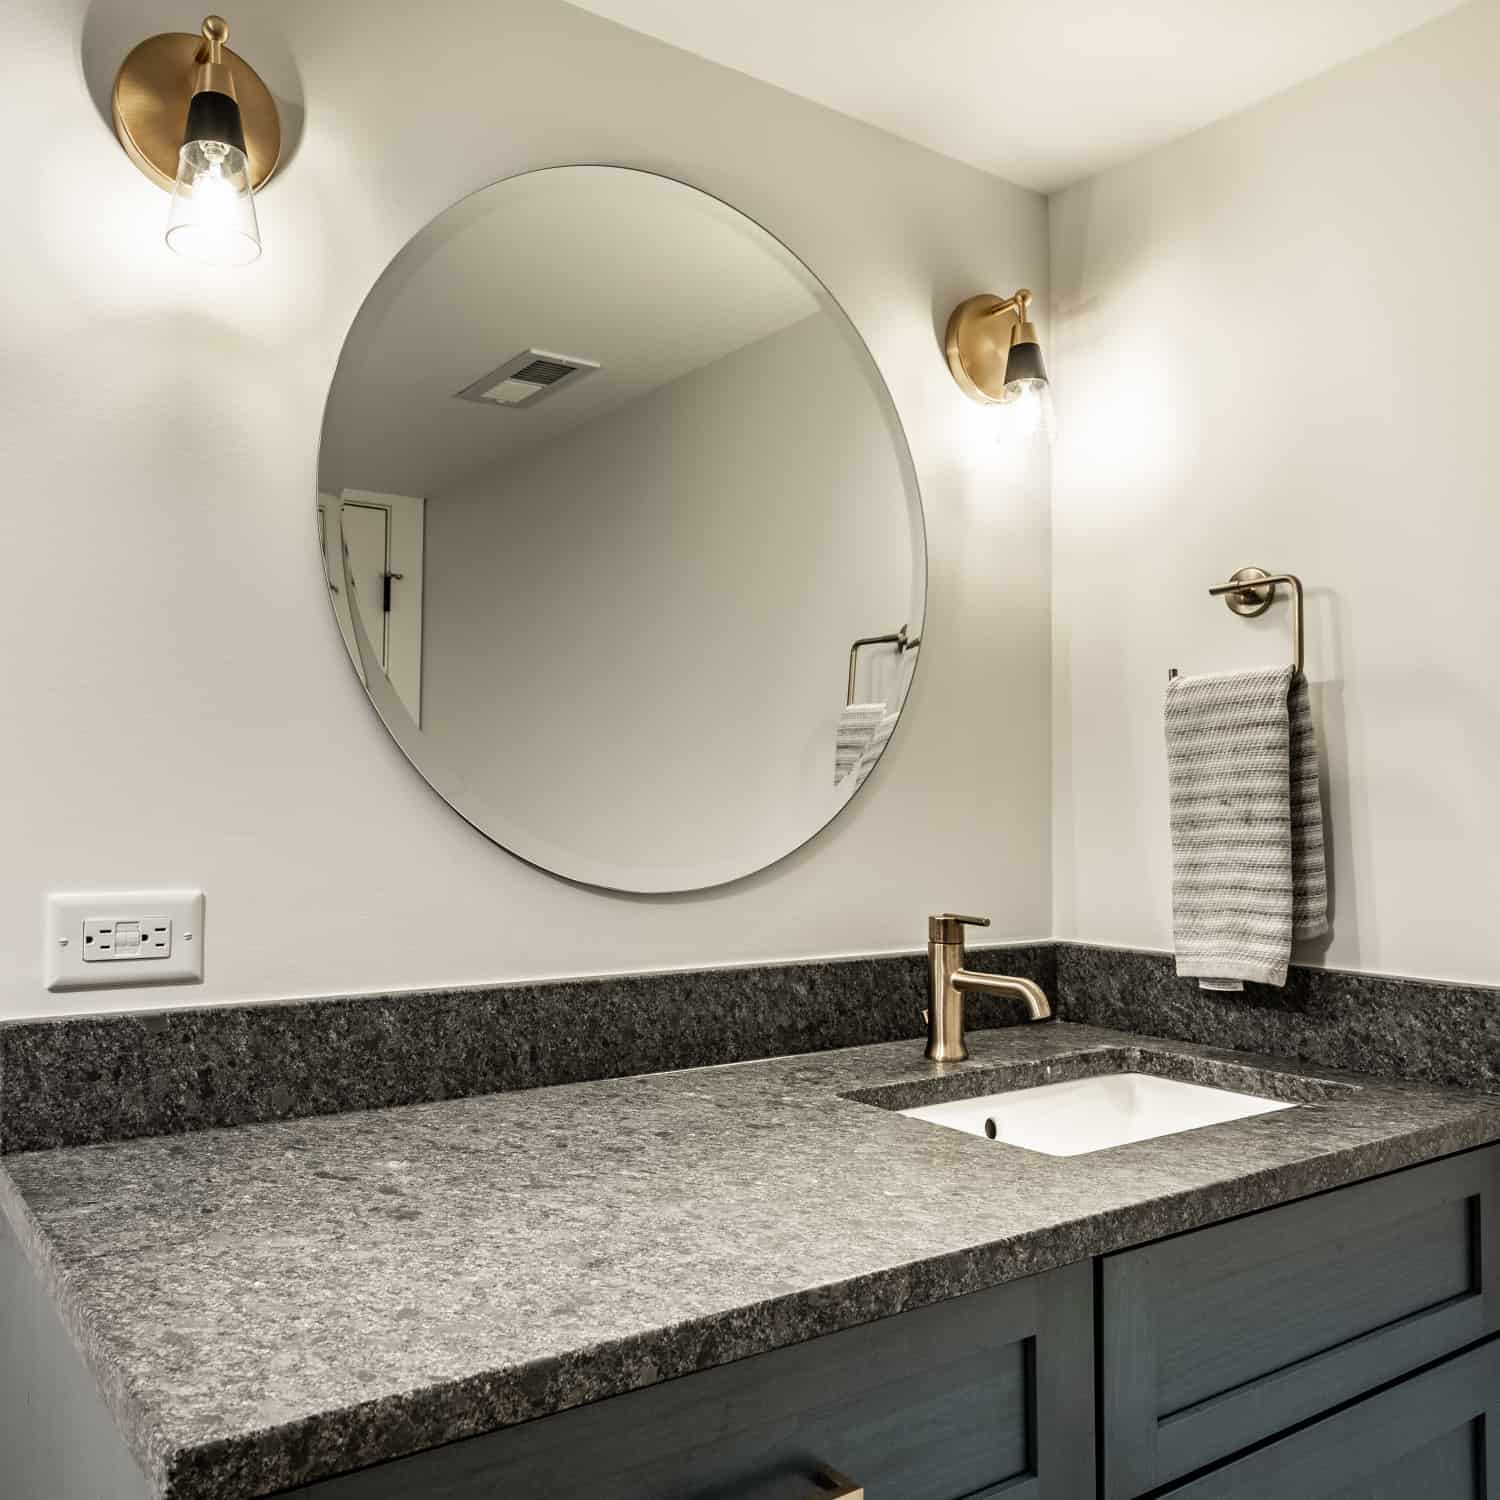 Nicholas Design Build | Remodel a bathroom with blue cabinets and a round mirror.